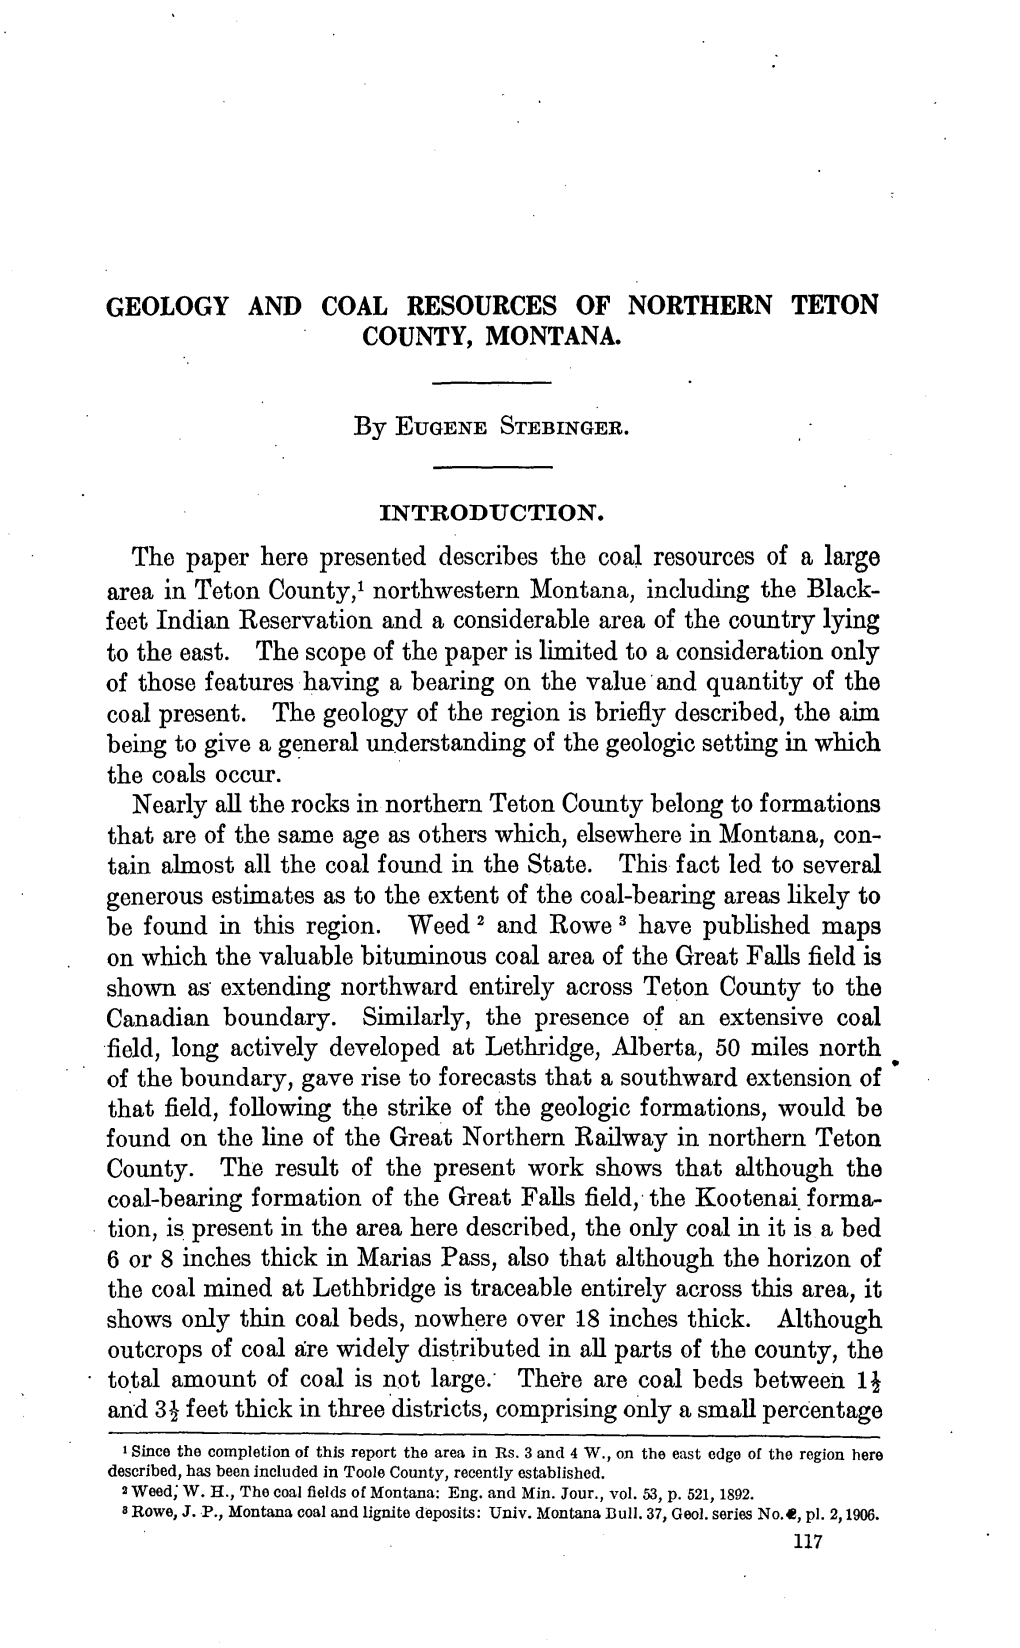 GEOLOGY and COAL RESOURCES of NORTHERN TETON COUNTY, MONTANA. by EUGENE STEBINGER. the Paper Here Presented Describes the Coal R